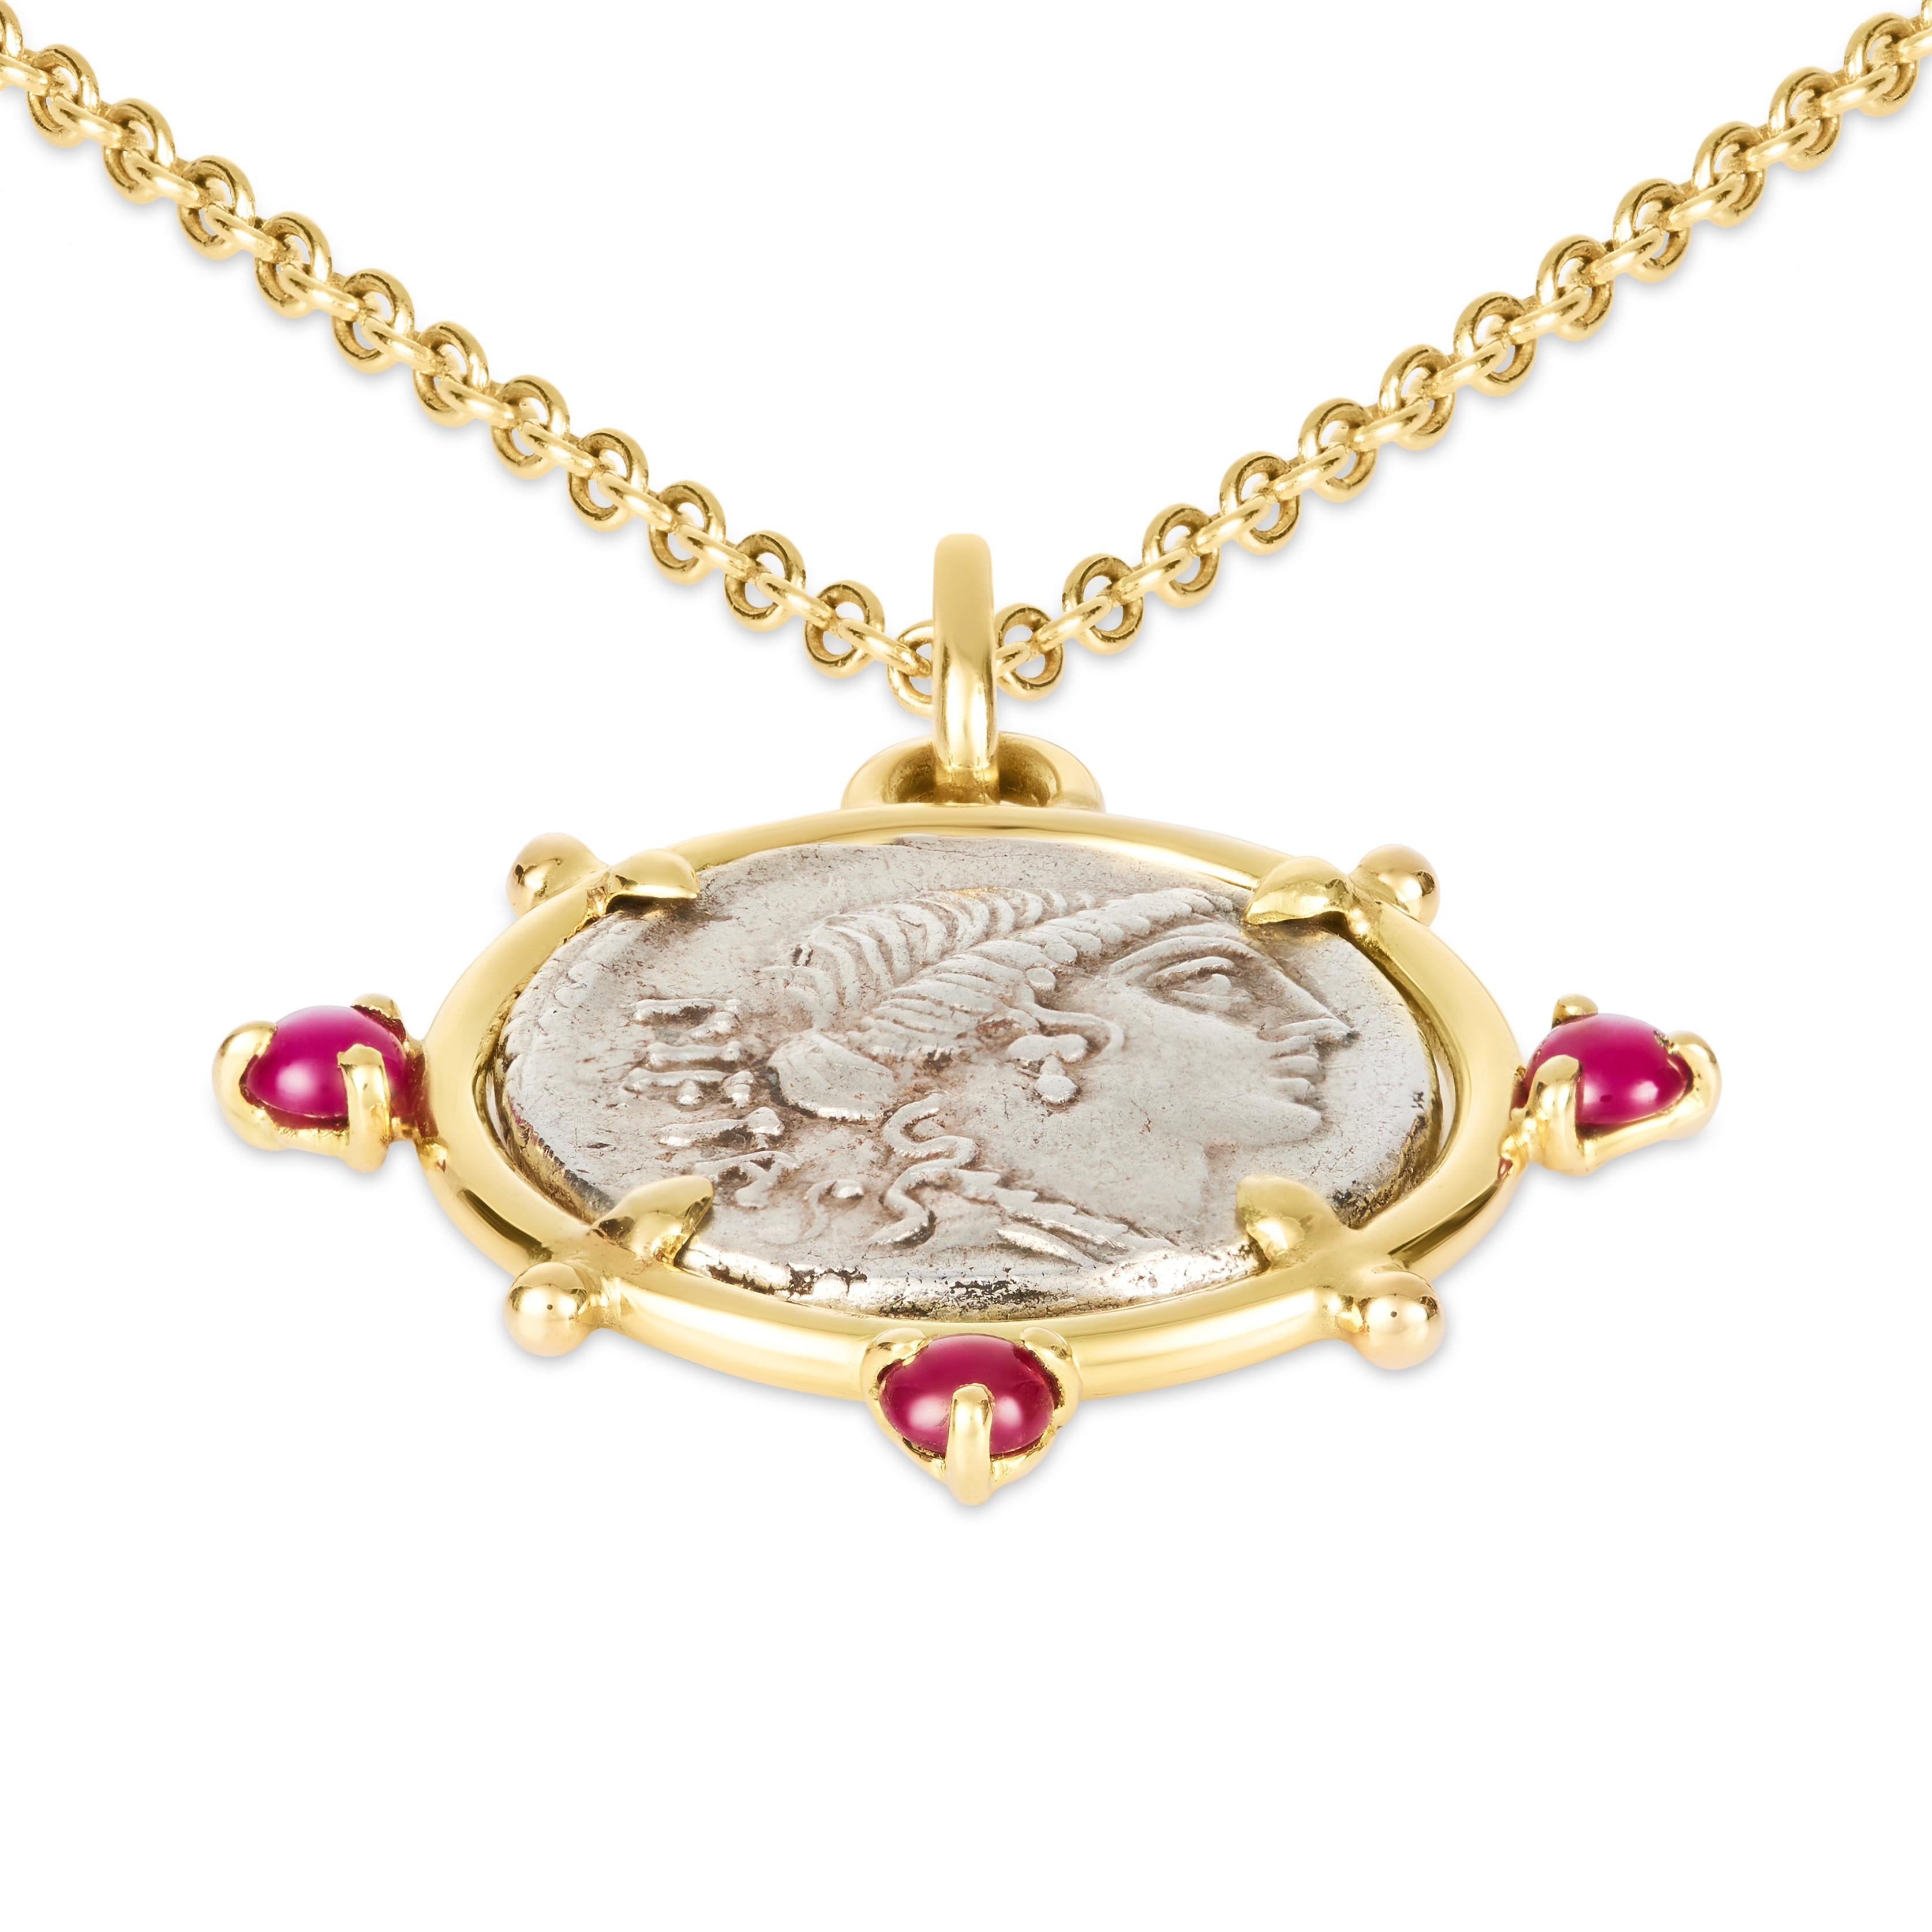 This DUBINI coin necklace from the 'Empires' collection features an authentic Roman denarius silver coin dating circa 74 B.C. set in 18kt yellow gold with peridot and citrine cabochons.

Included is a 47cm chain in 18kt yellow gold.

Depicted on the